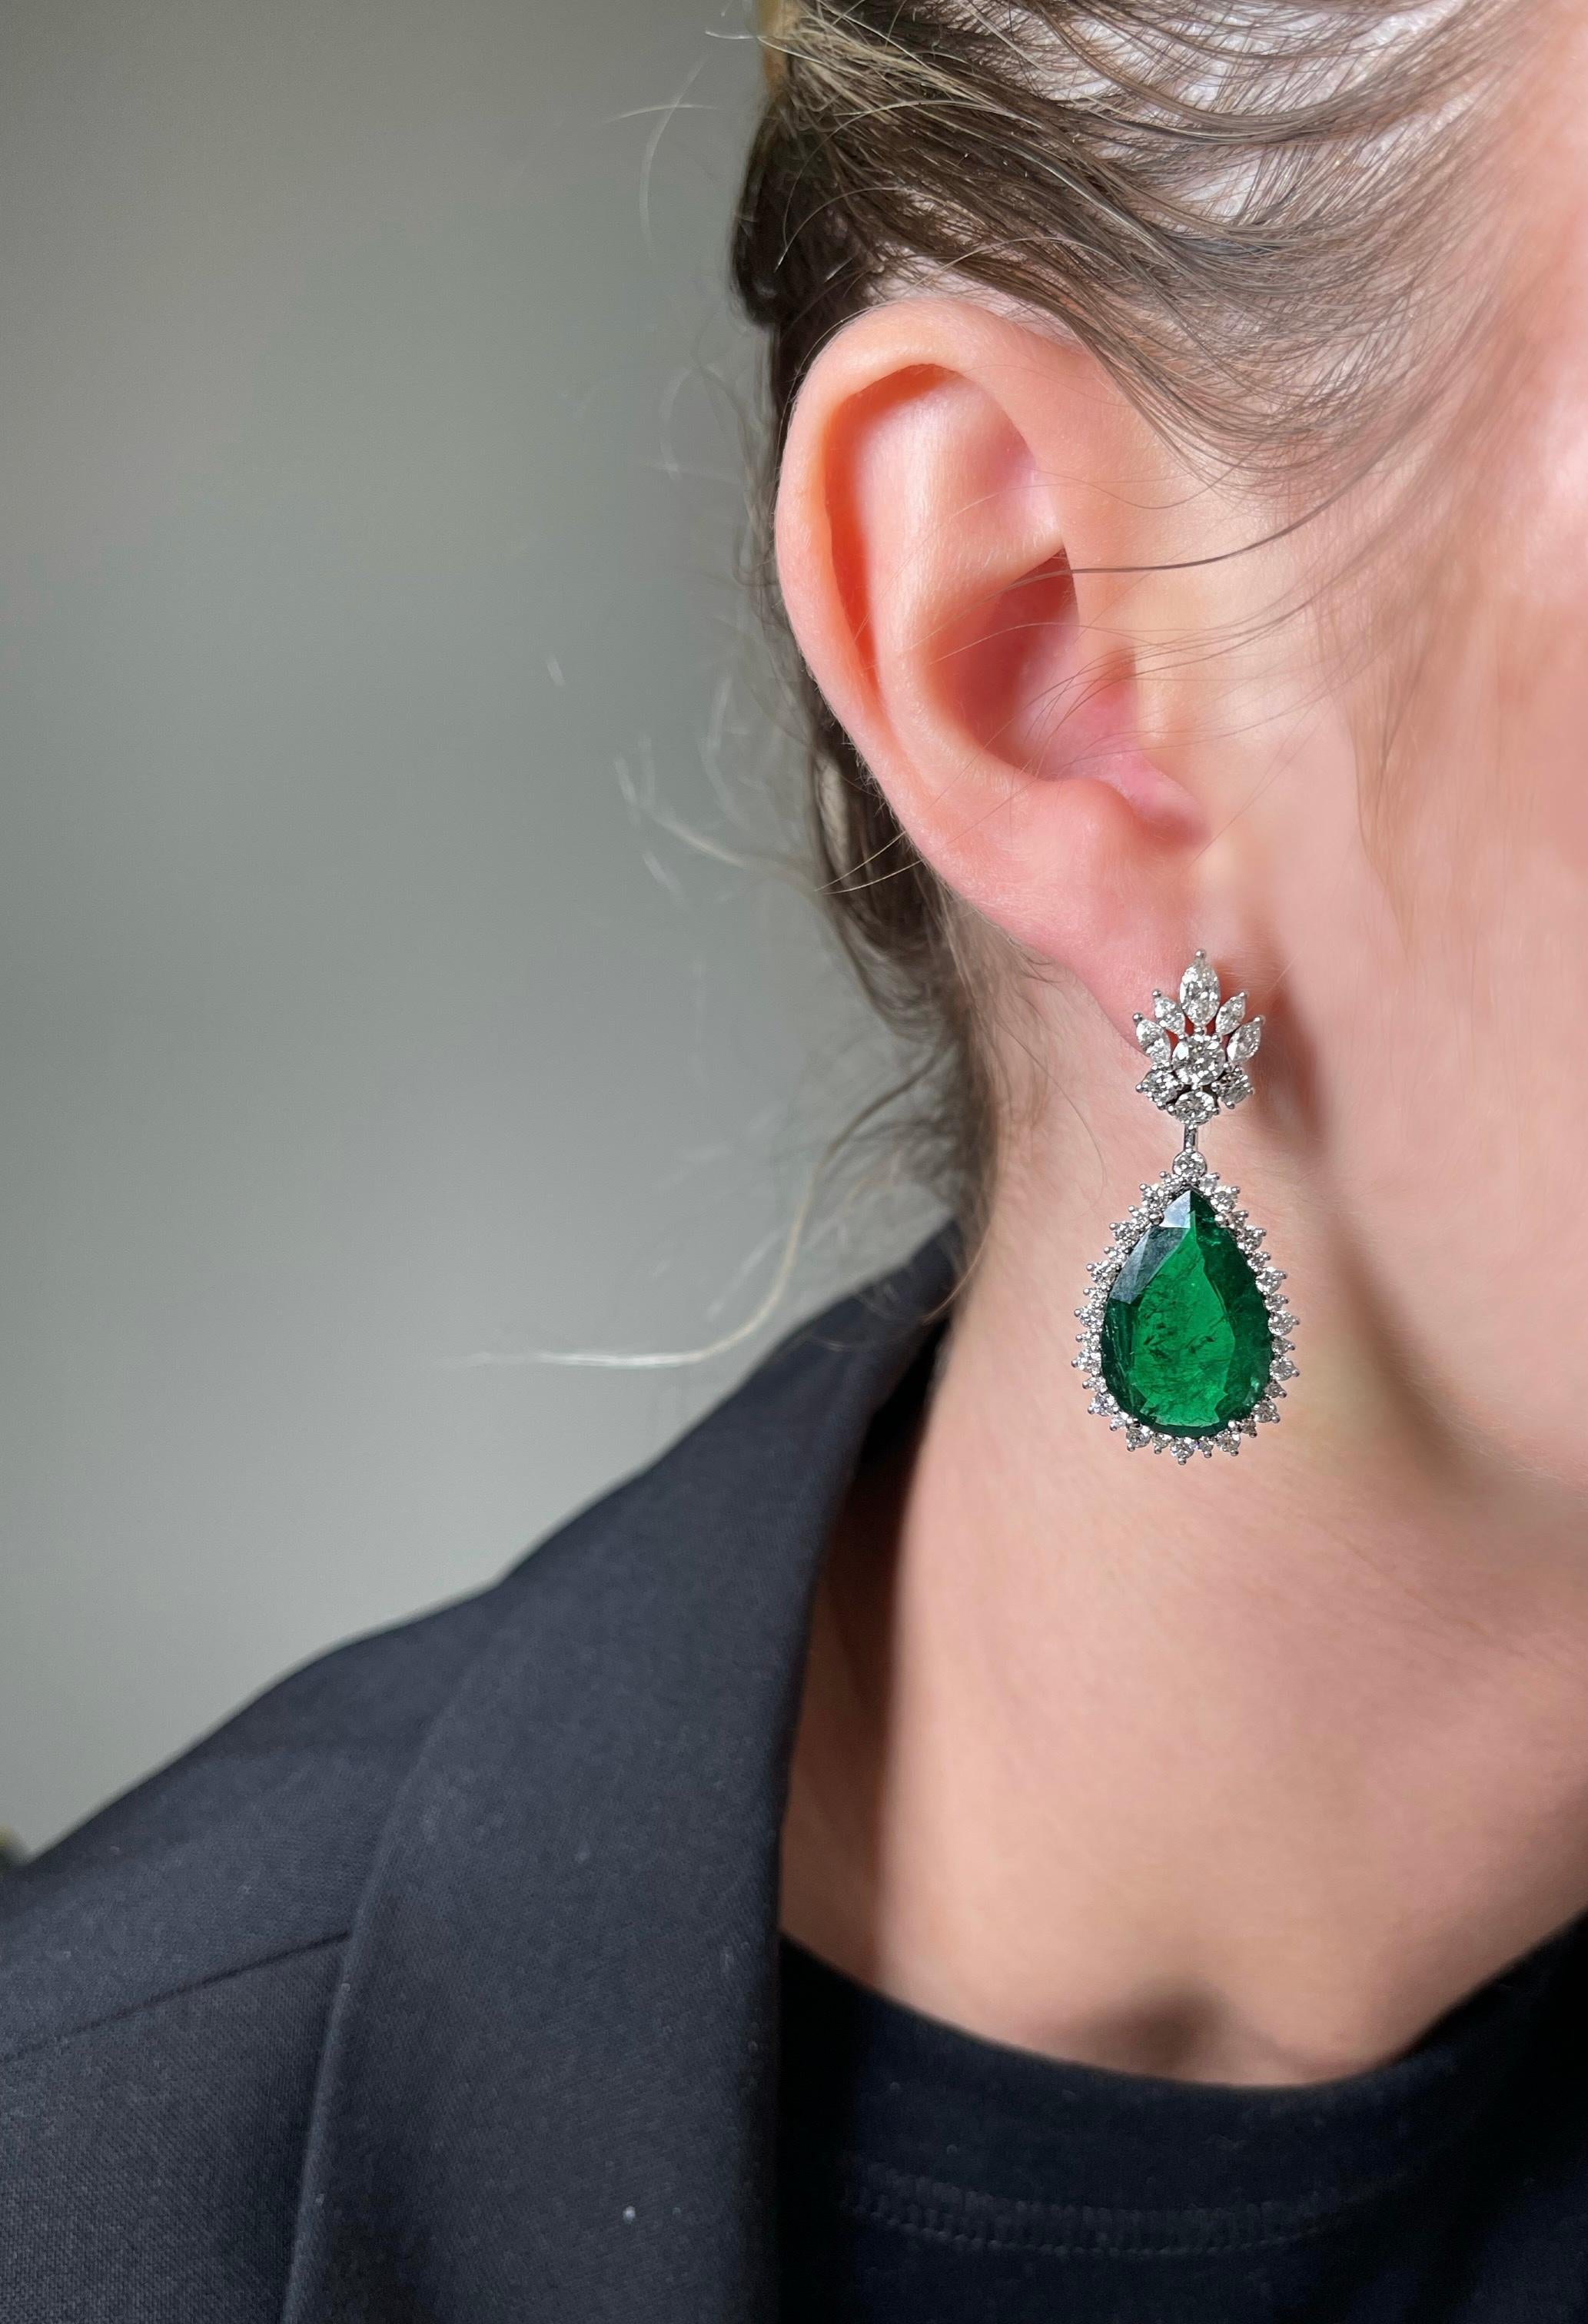 Introducing an exquisite set of Natural Emerald and Diamond Earrings, a true testament to elegance and sophistication. Each earring features a mesmerizing Vivid Green Zambian Emerald, skillfully cut into a captivating pear shape, boasting an